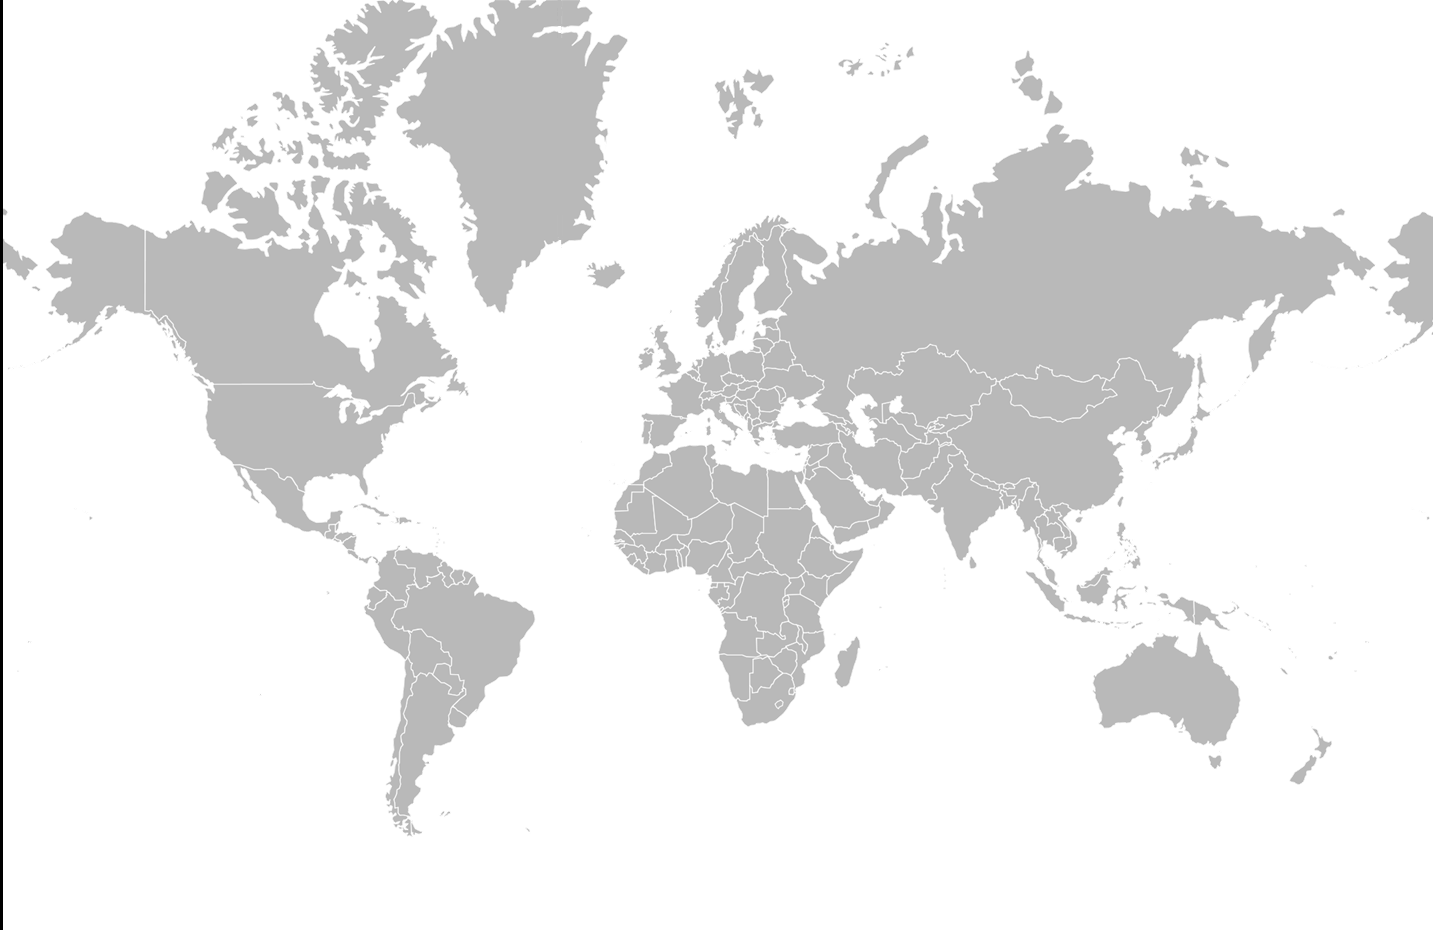 File:World map green.png